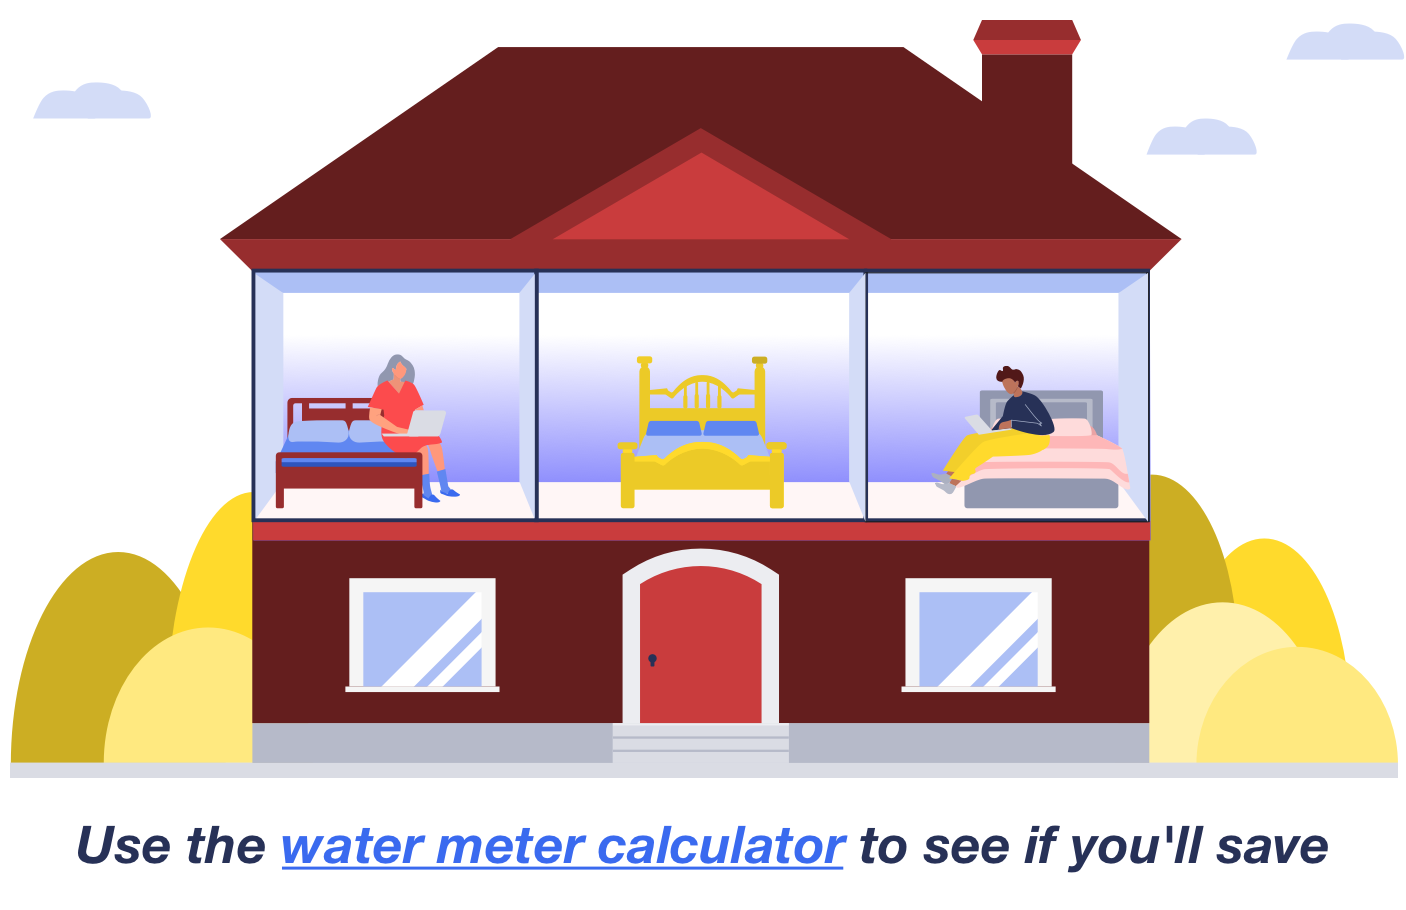 See if you'll save with the water meter calculator in MSE's Cut your water bills guide.